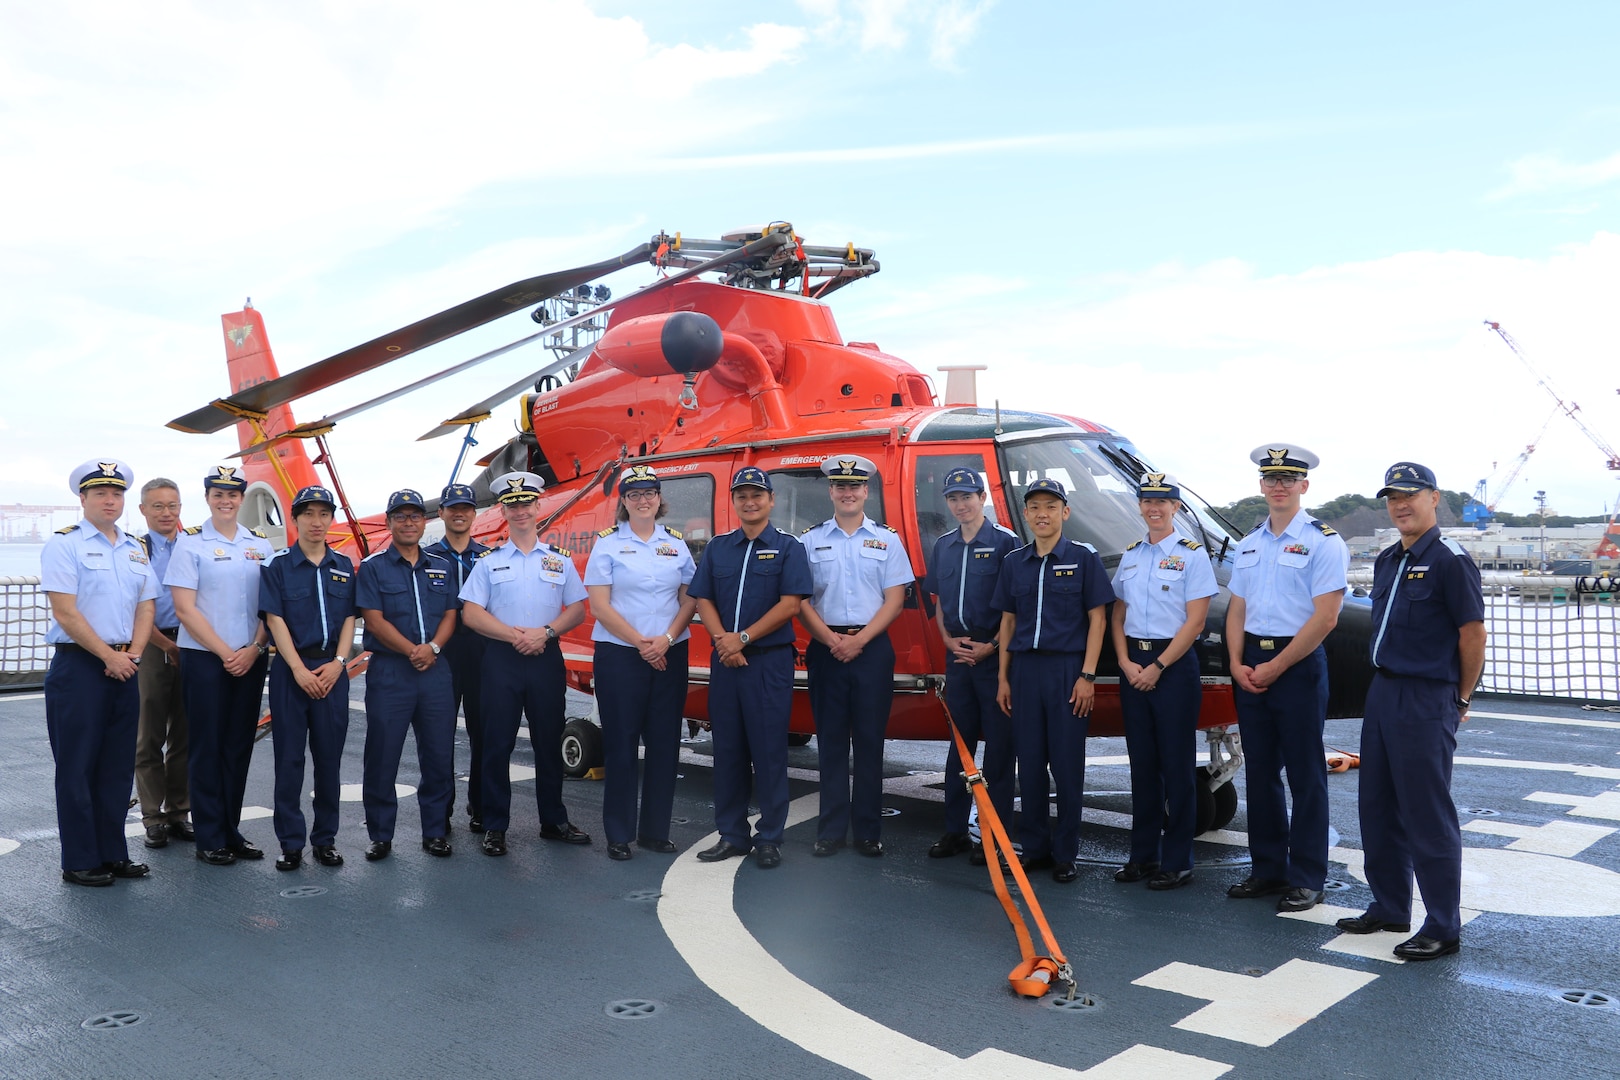 U.S. Coast Guard Cutter Munro command staff stand with Capt. Tetsuhiro Nakagawa, the Director for International Strategy for the Japan Coast Guard, and officers from the Japan Coast Guard after touring the Munro during the cutter’s port call to Yokosuka, Japan, Aug. 8, 2023. Yokosuka was Munro’s first international port call during their months-long deployment to the Indo-Pacific region. (U.S. Coast Guard photo)